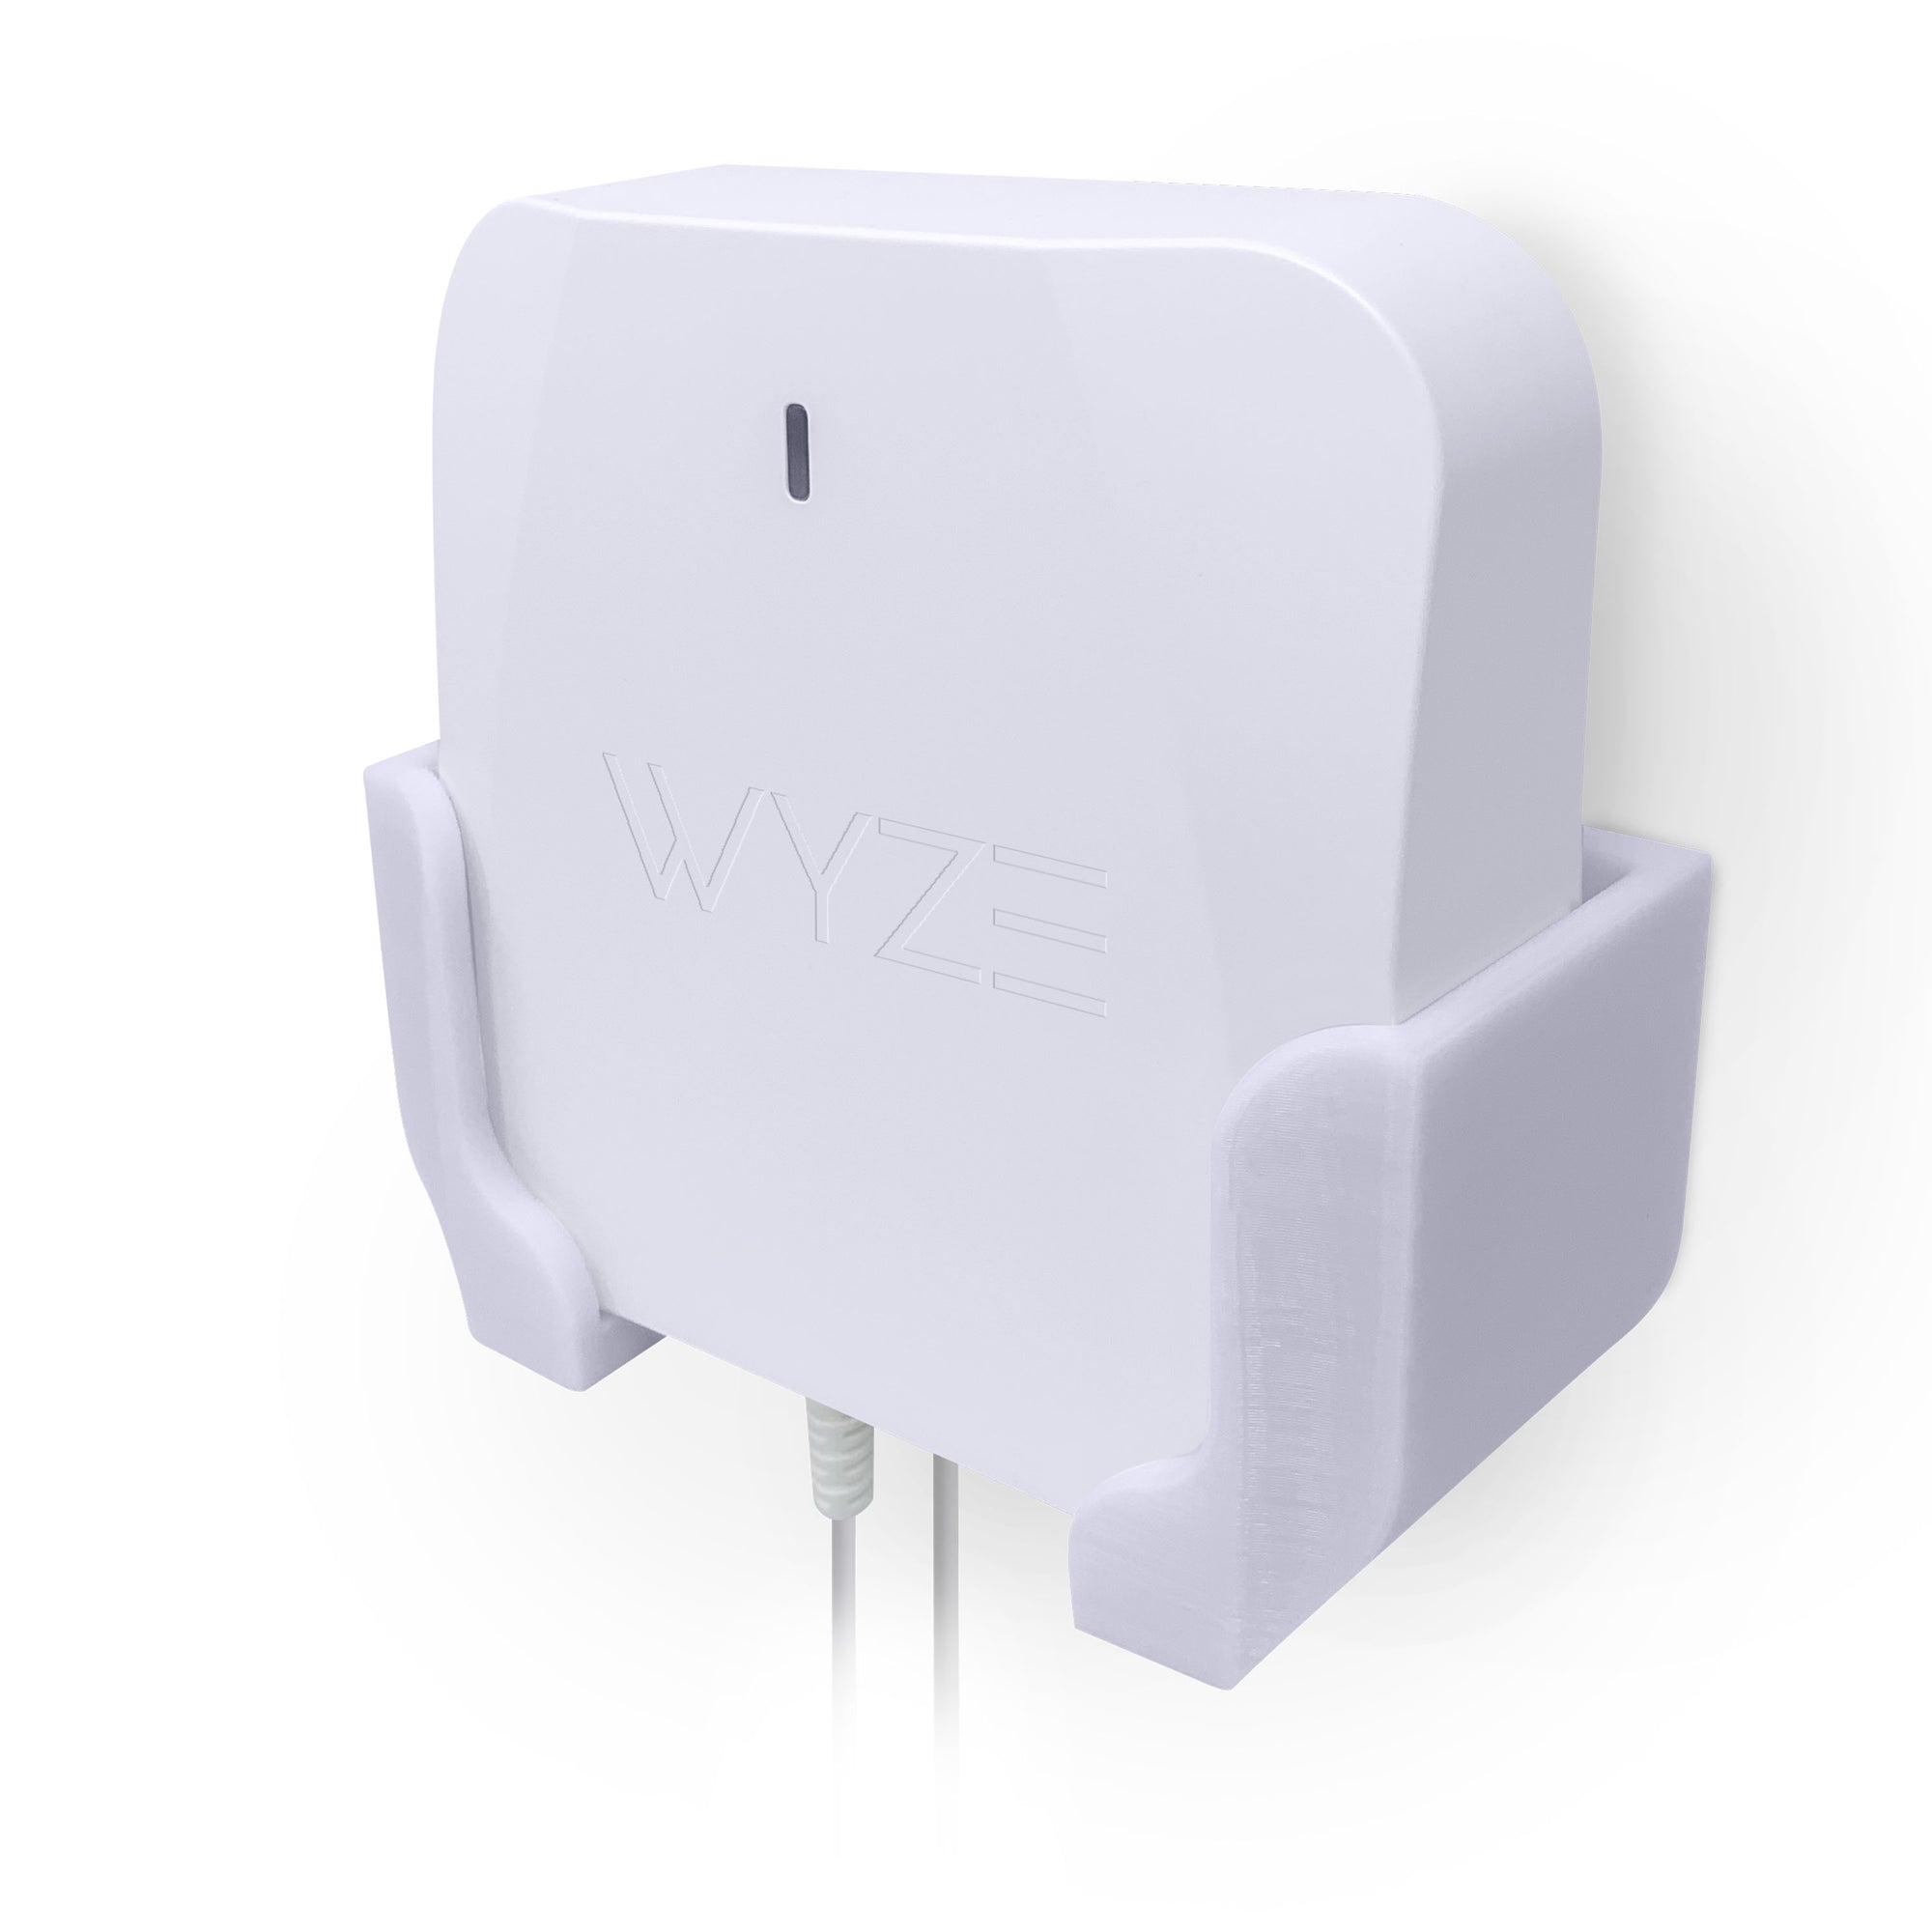 Screwless Wall Mount For Wyze WiFi 6 AX3000 Mesh Router, Strong VHB Adhesive, Easy to Install, Reduce Interference & Increase Range, Stick On & Screw-in Mounting